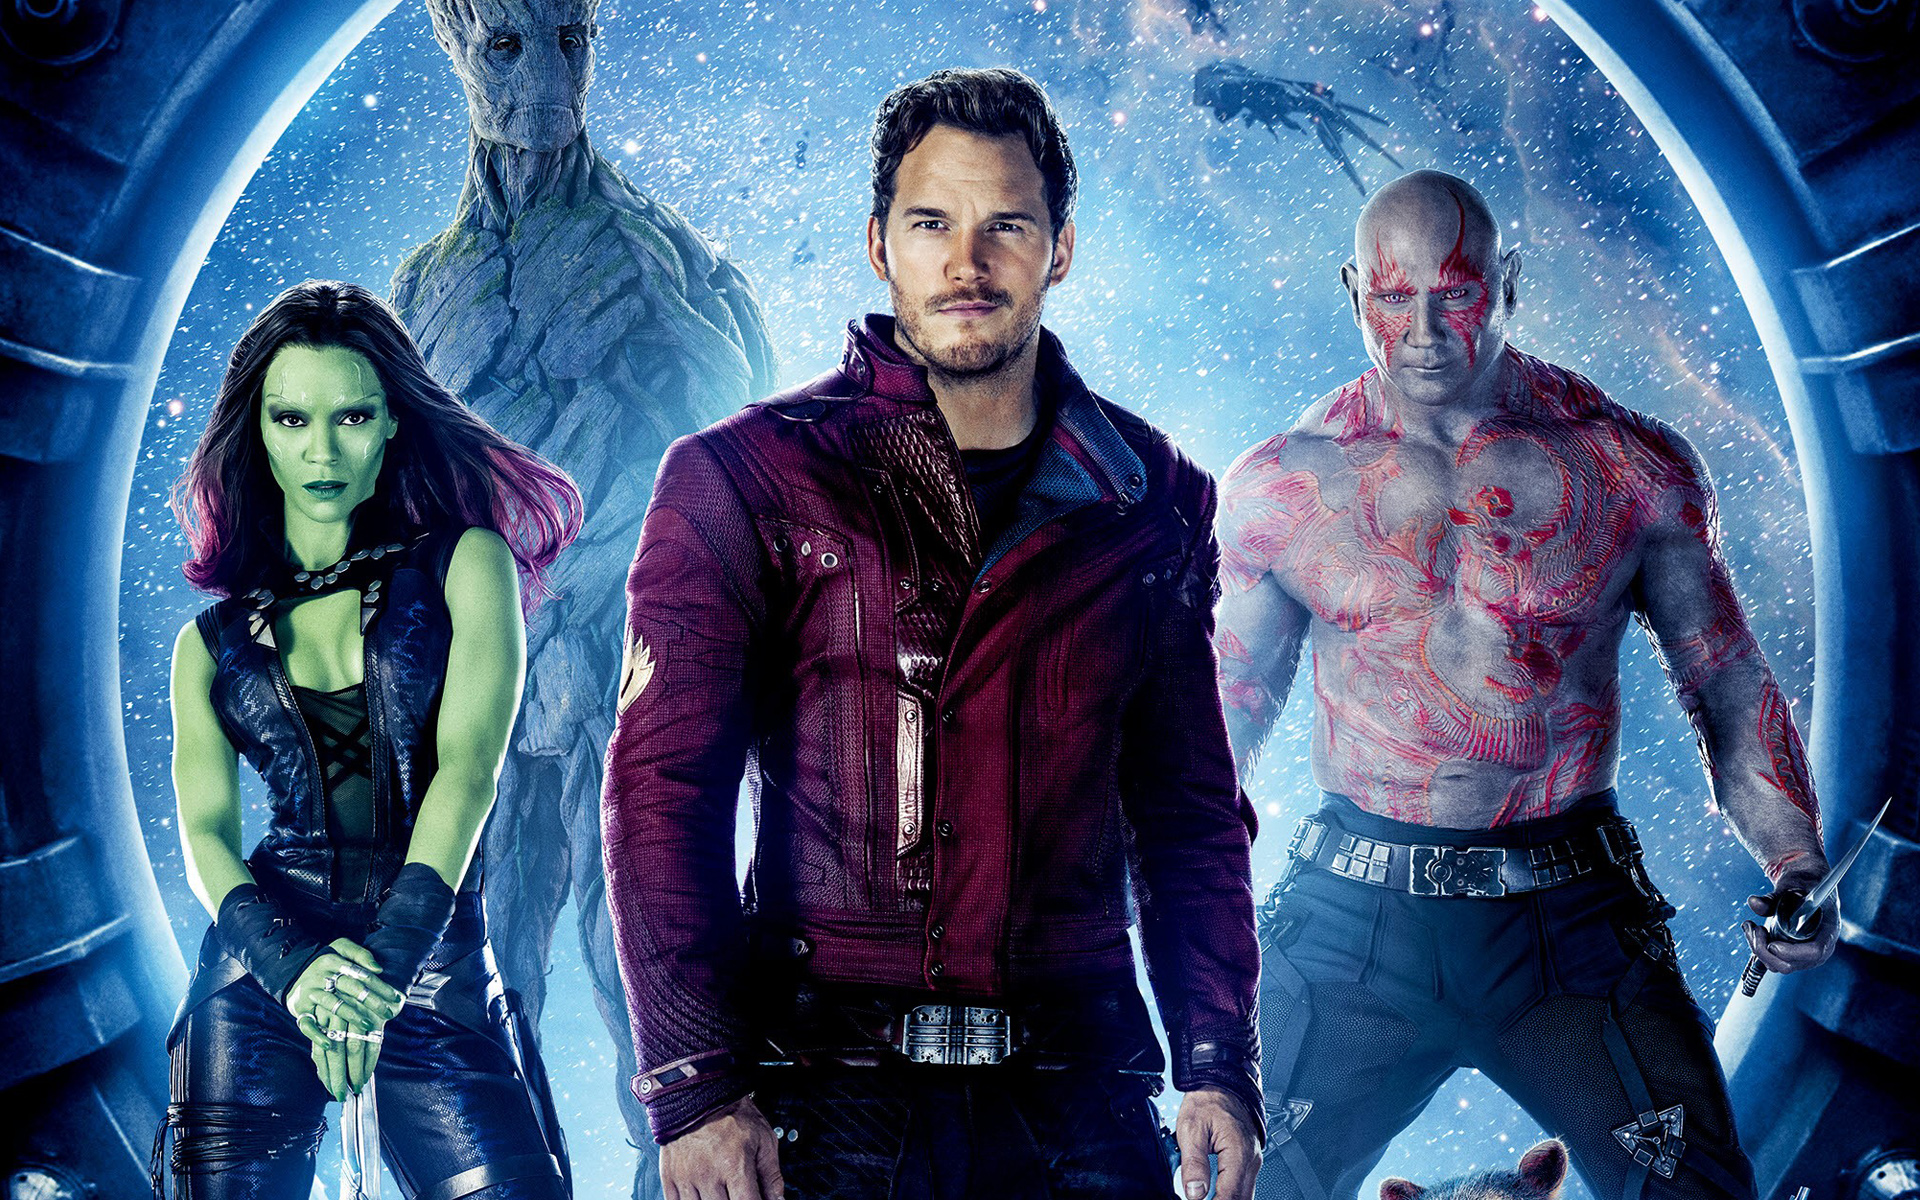 guardians_of_the_galaxy_2014_movie-wide.jpg